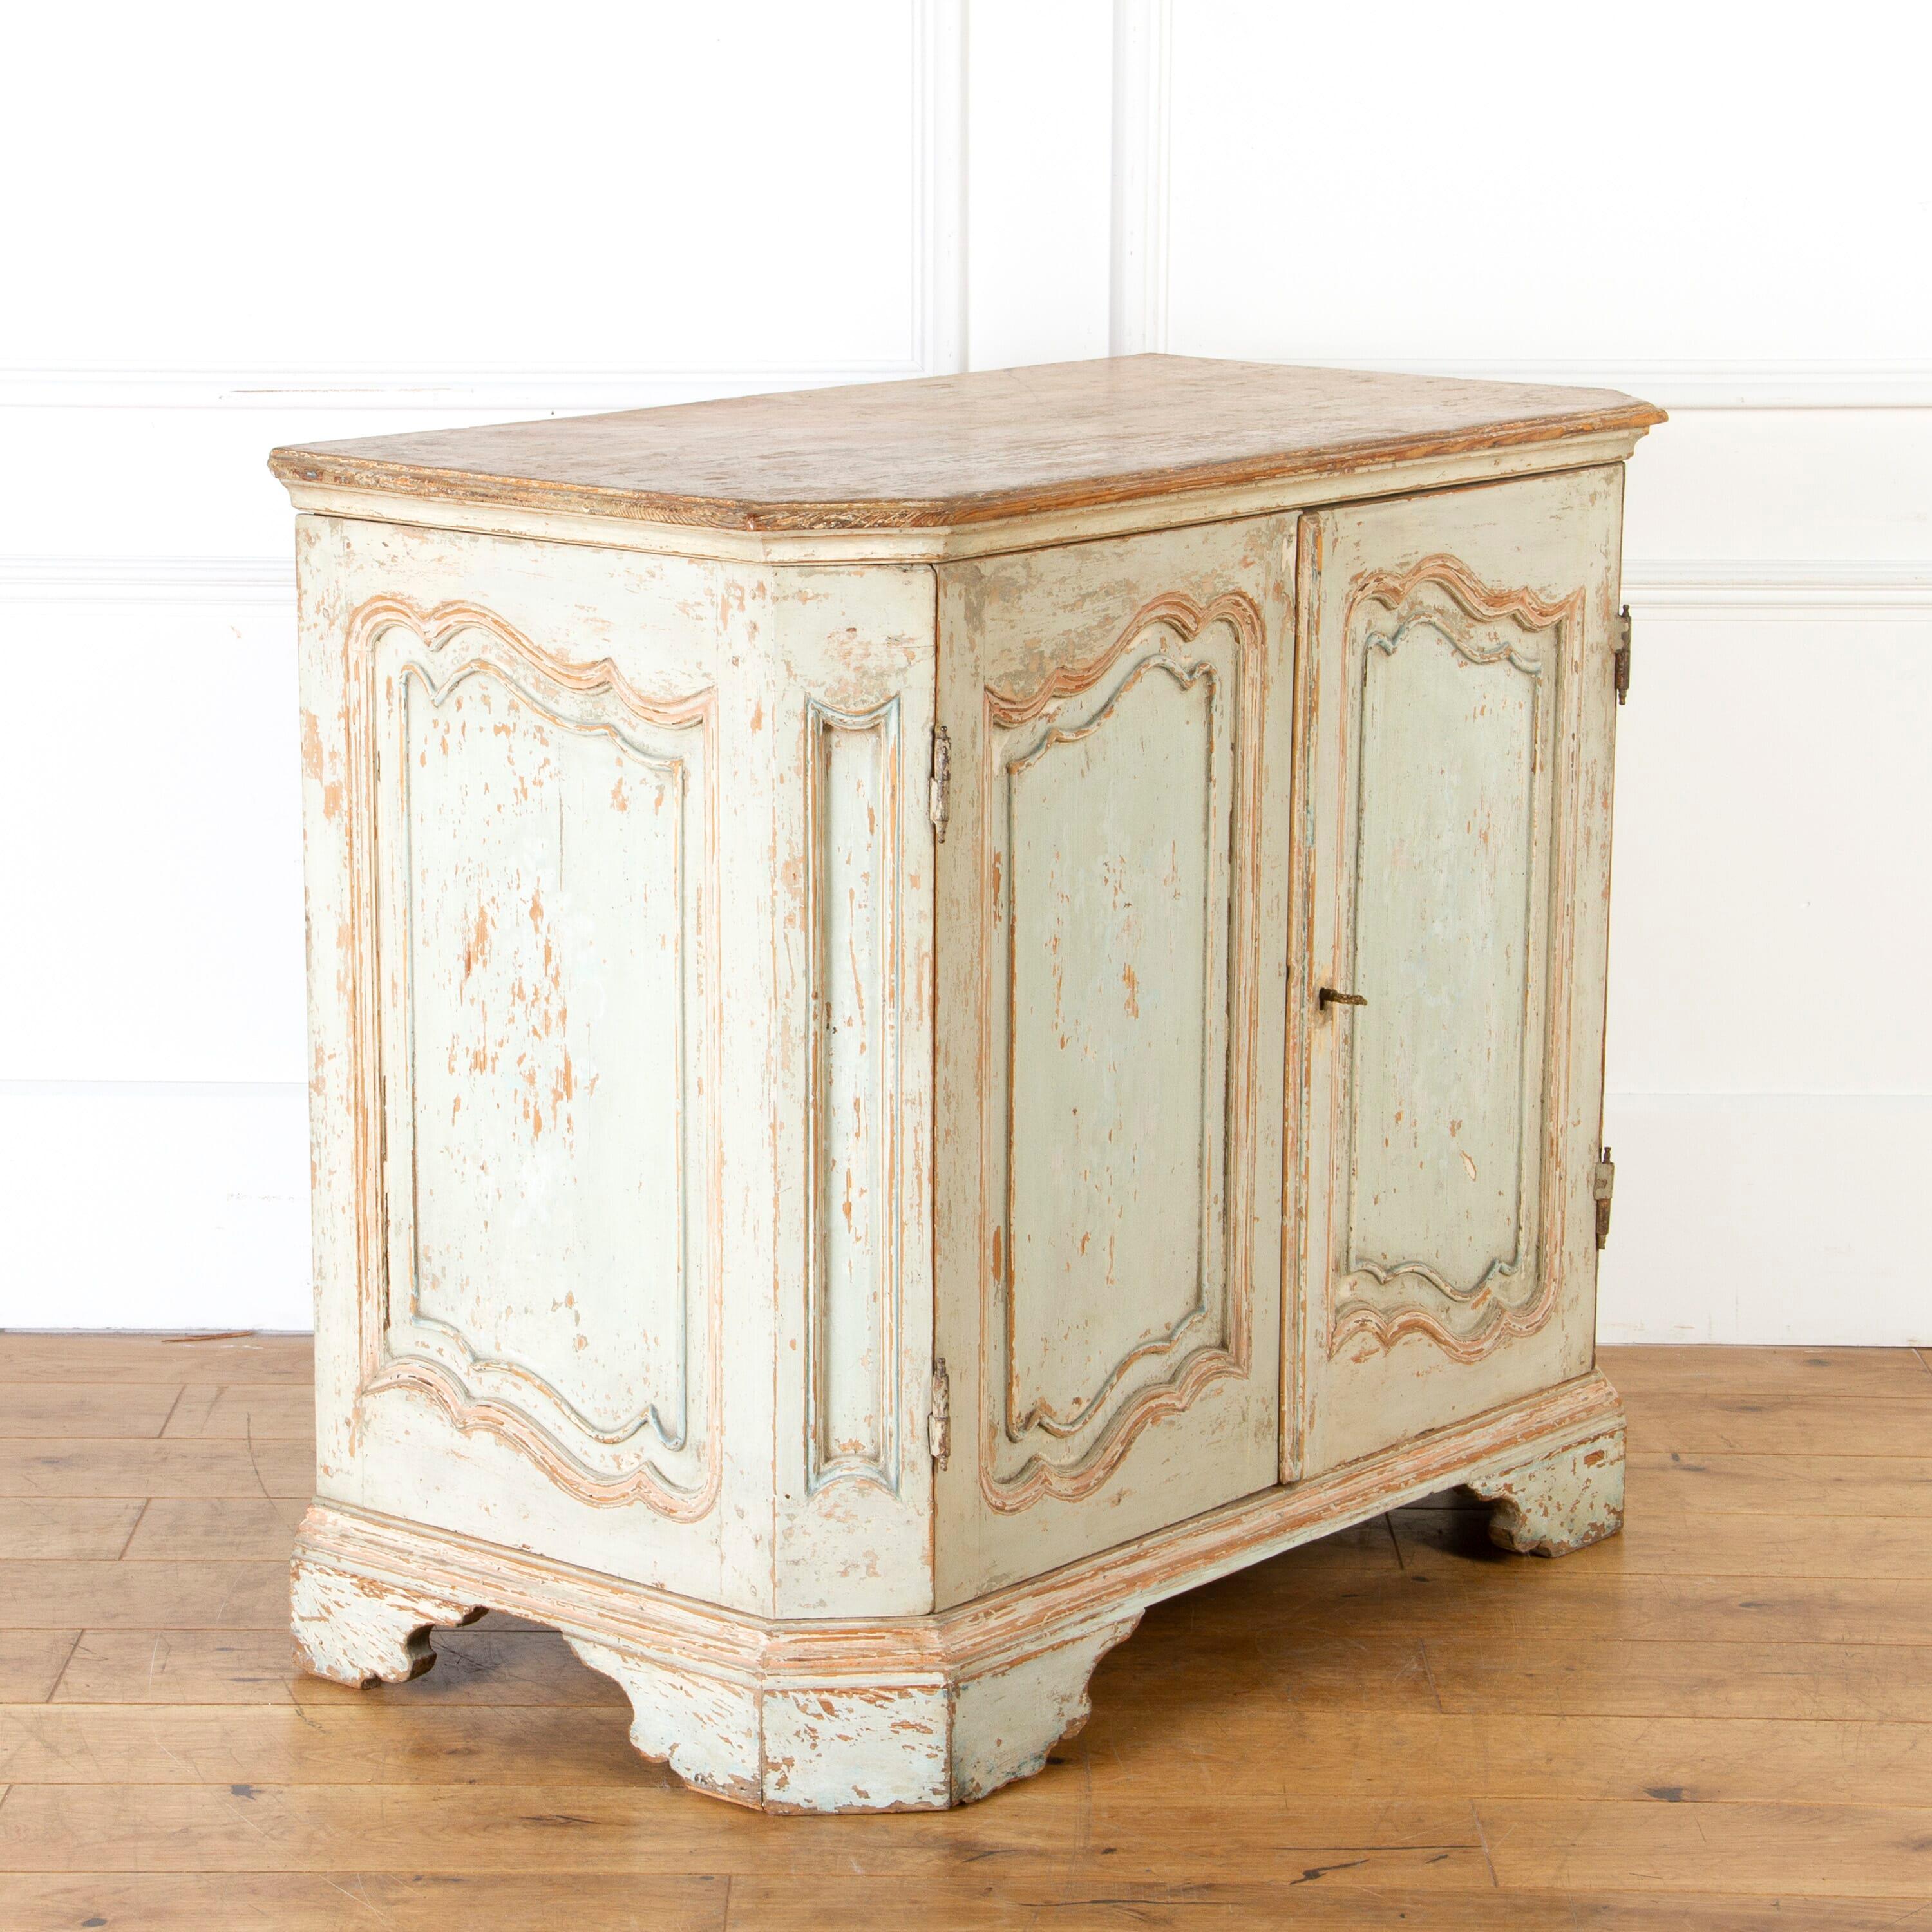 French 18th Century two-door buffet.

This attractive piece has its original hardware and early paintwork.

It has two panelled doors that open to a spacious interior and two deep-set shelves.

The whole is raised on a beautifully carved apron, with